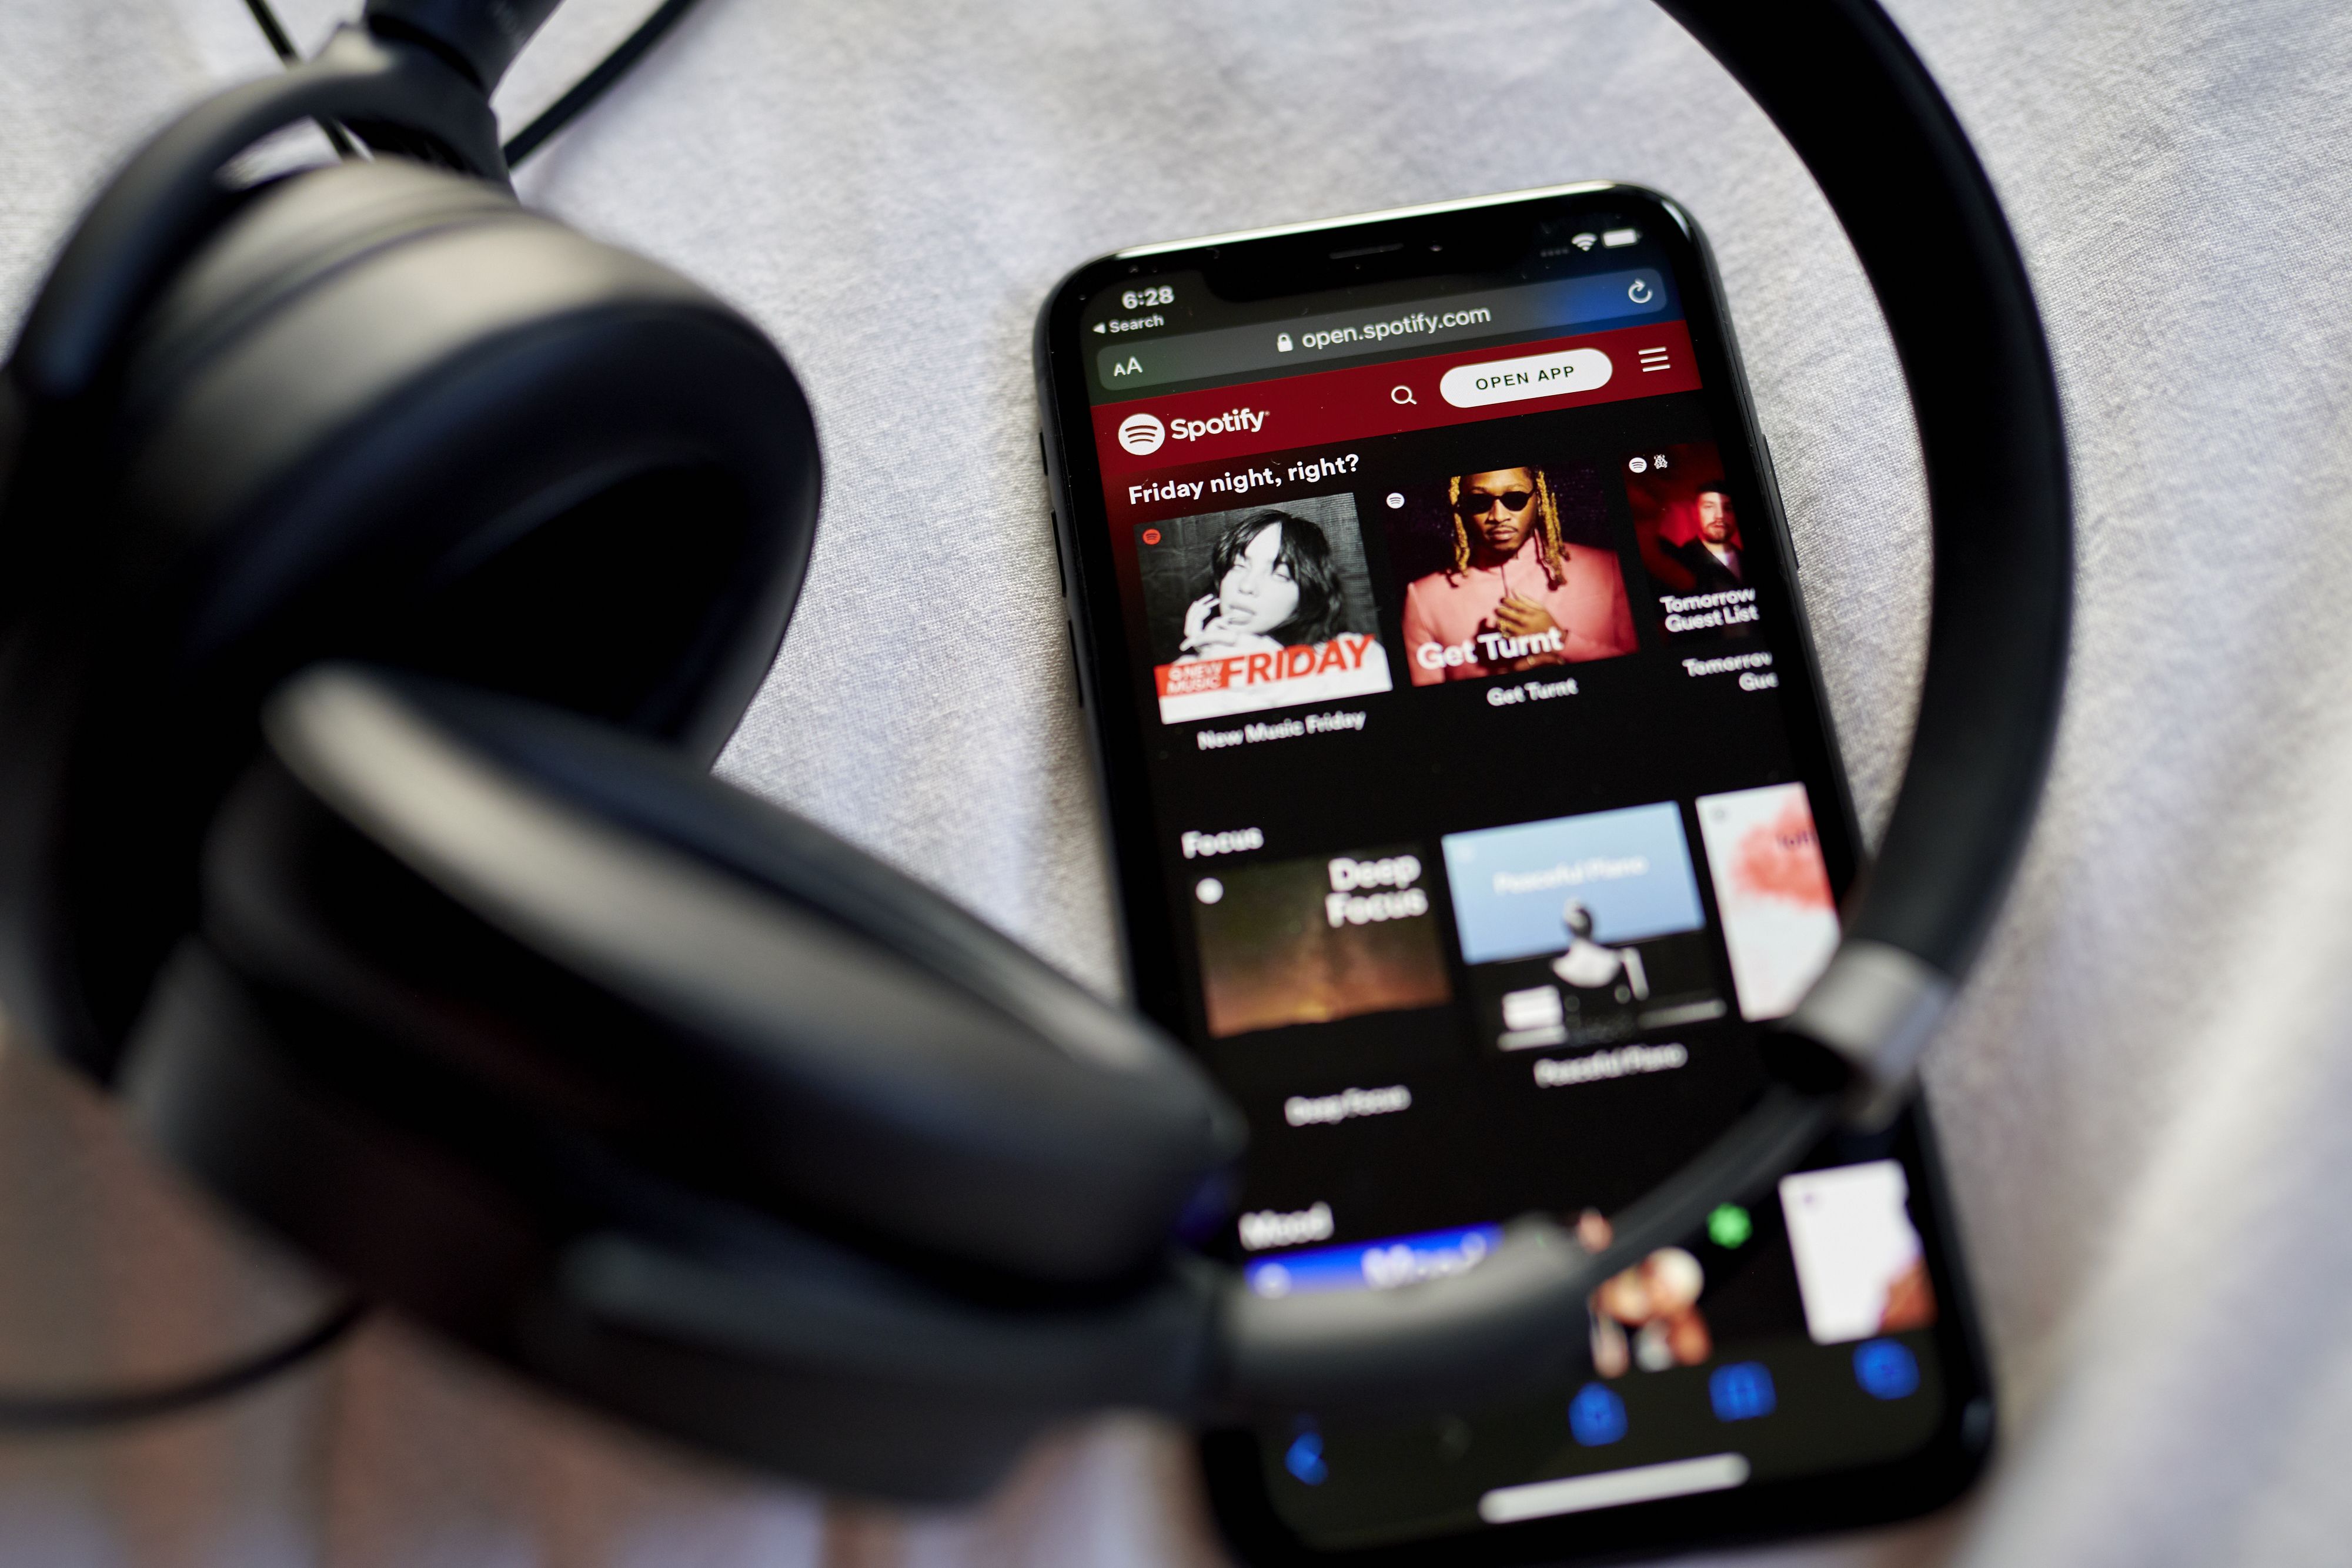 Spotify says its iPhone app updates in the EU are getting held up by Apple  - The Verge